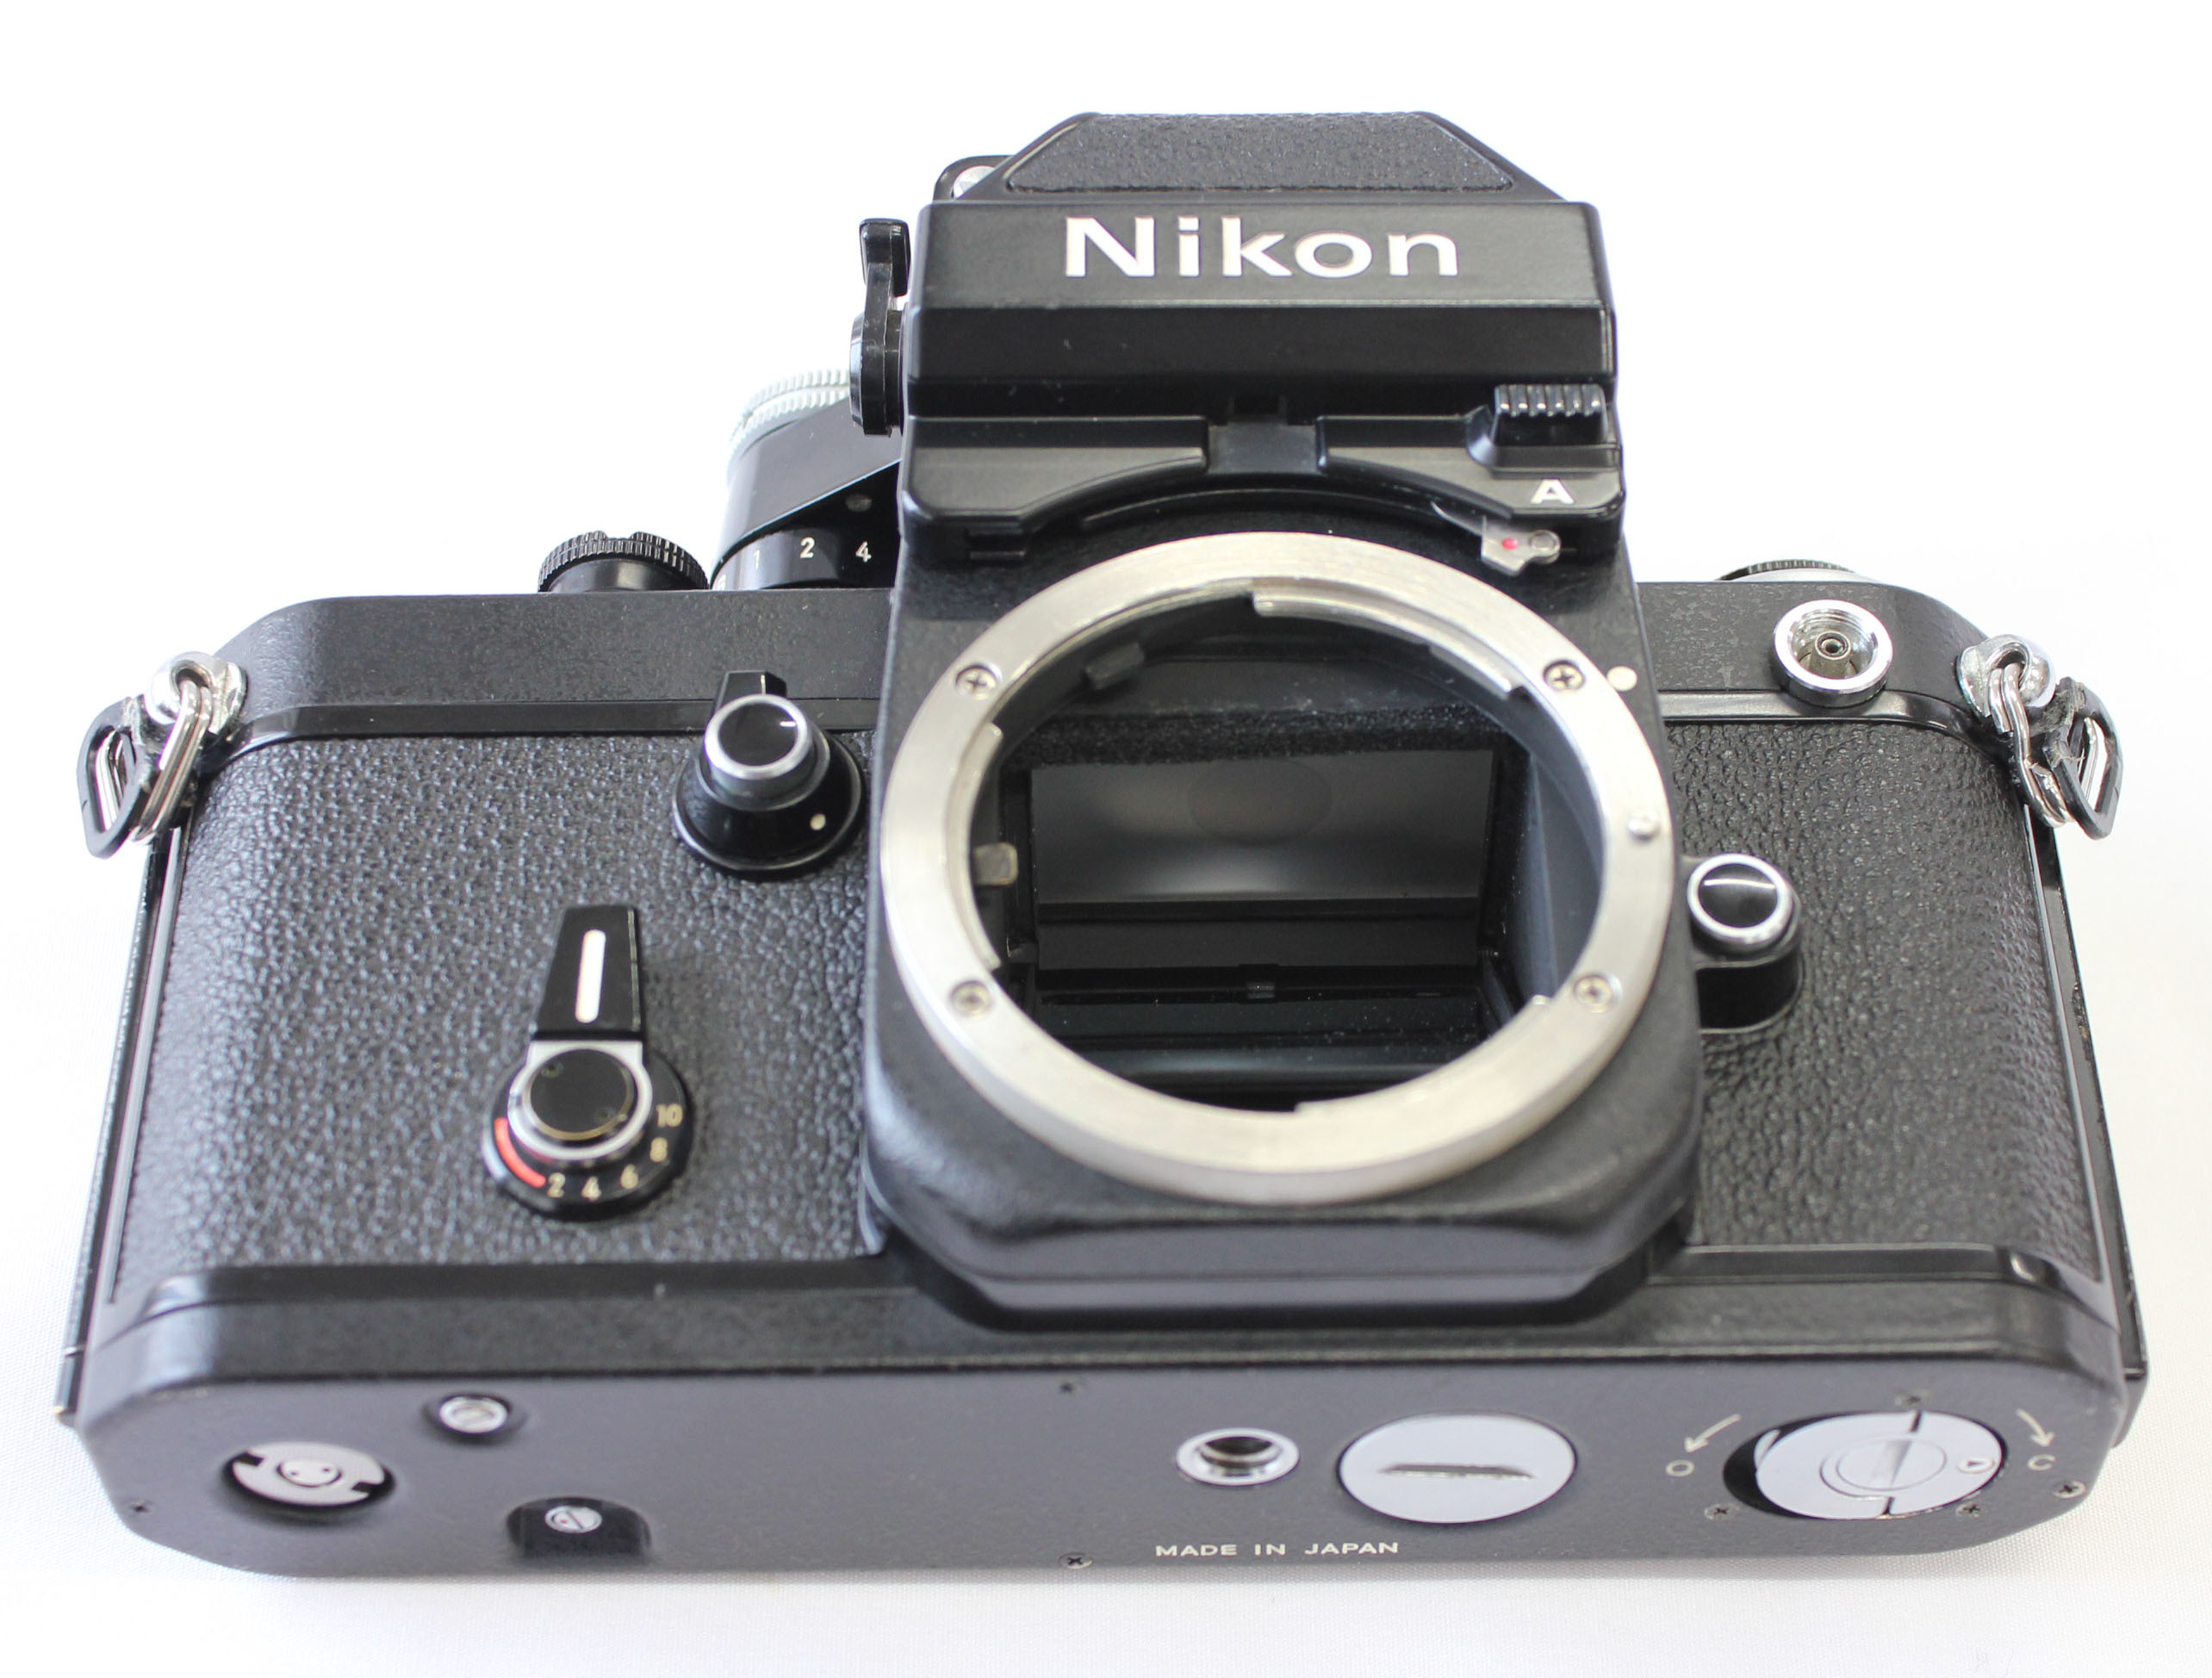 Nikon F2 Titan F2T No Name 35mm SLR Film Camera Body with Photomic A DP-11 Finder from Japan Photo 9